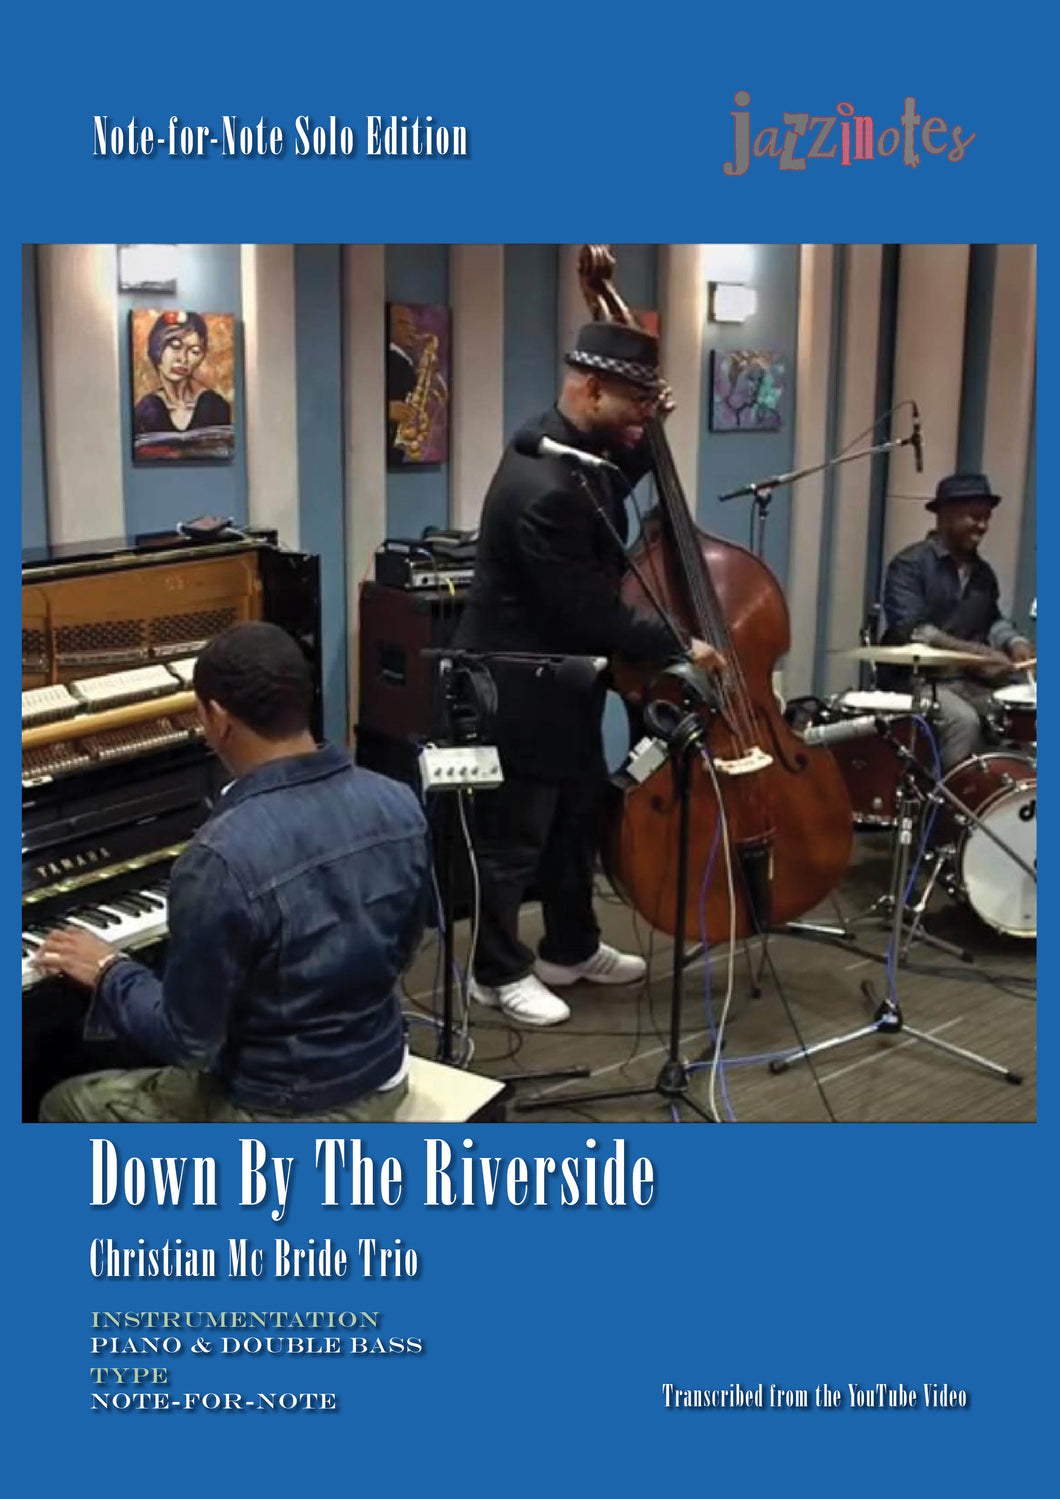 McBride, Christian, Trio: Down By The Riverside - Sheet Music Download